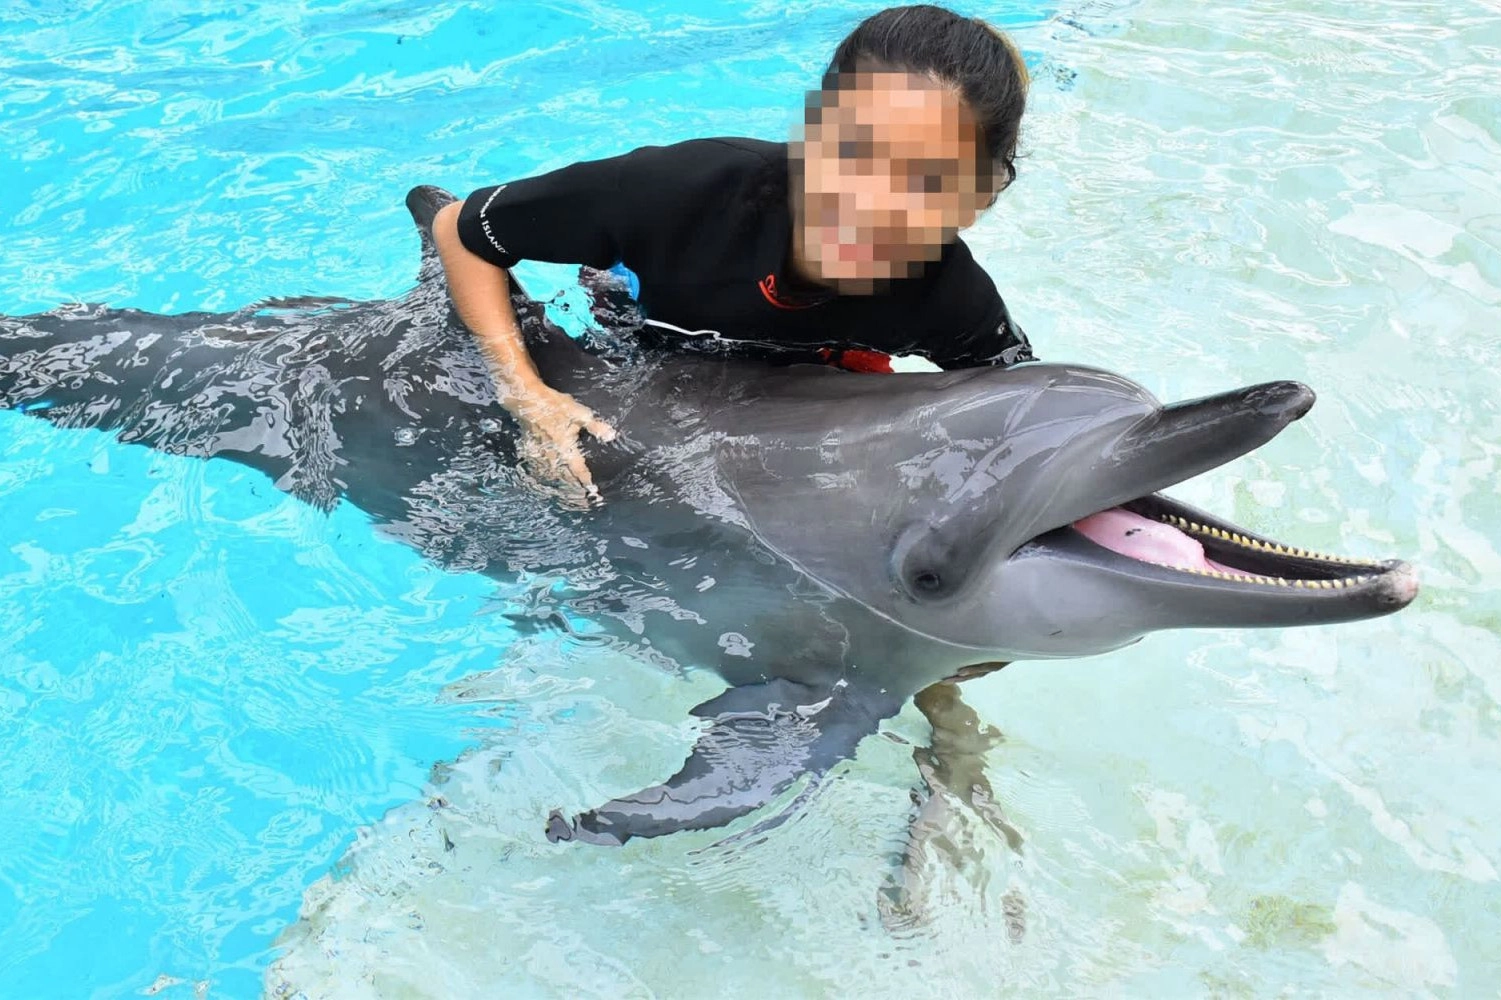 Dolphin being used for photo opportunities at Resort World Sentosa, Singapore - World Animal Protection - Dolphins in captivity